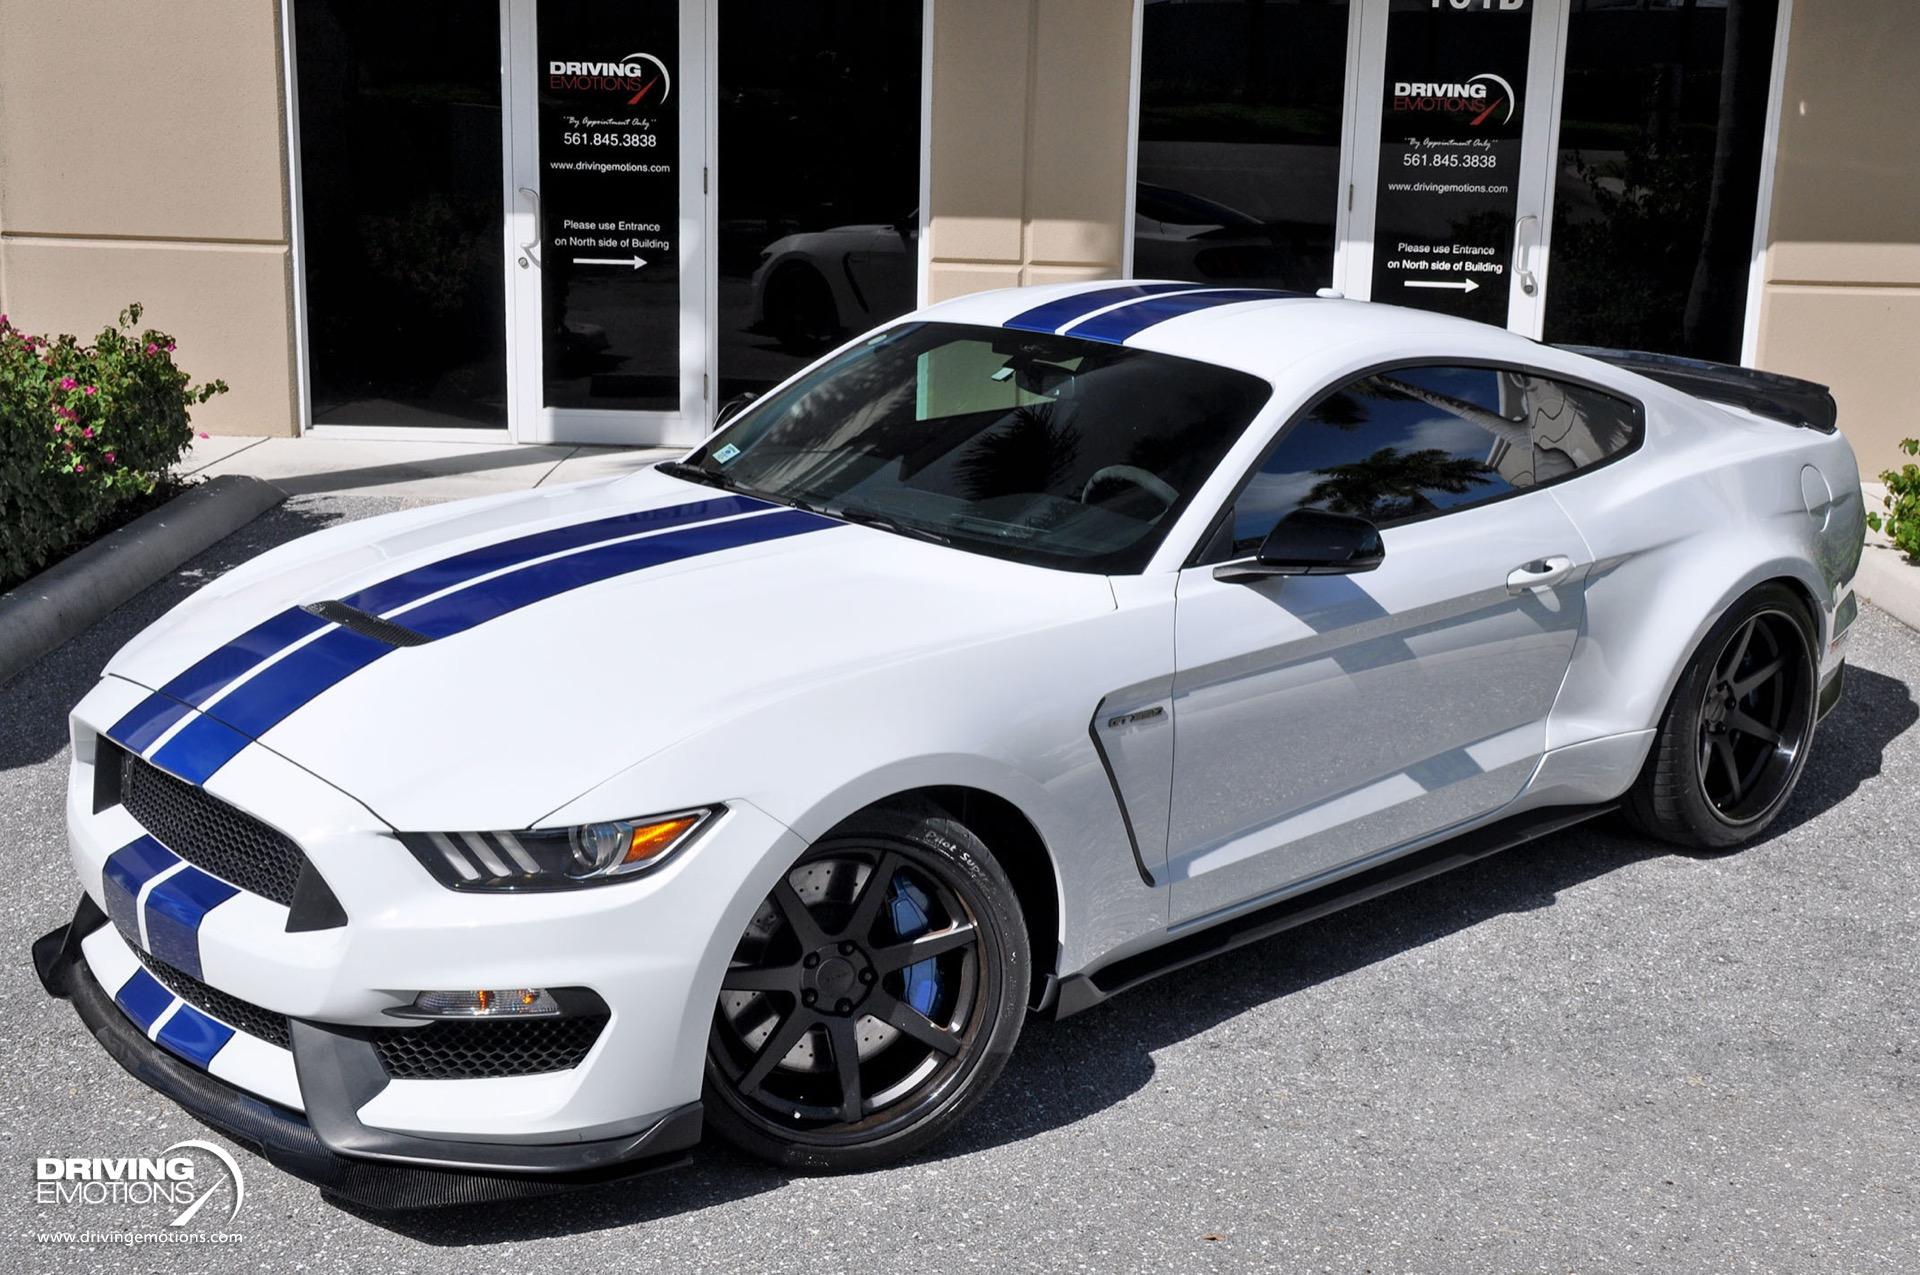 Used 2017 Ford Mustang Shelby GT350 ELECTRONICS PACKAGE! CUSTOM WIDE BODY! CUSTOM UPGRADES! | Lake Park, FL